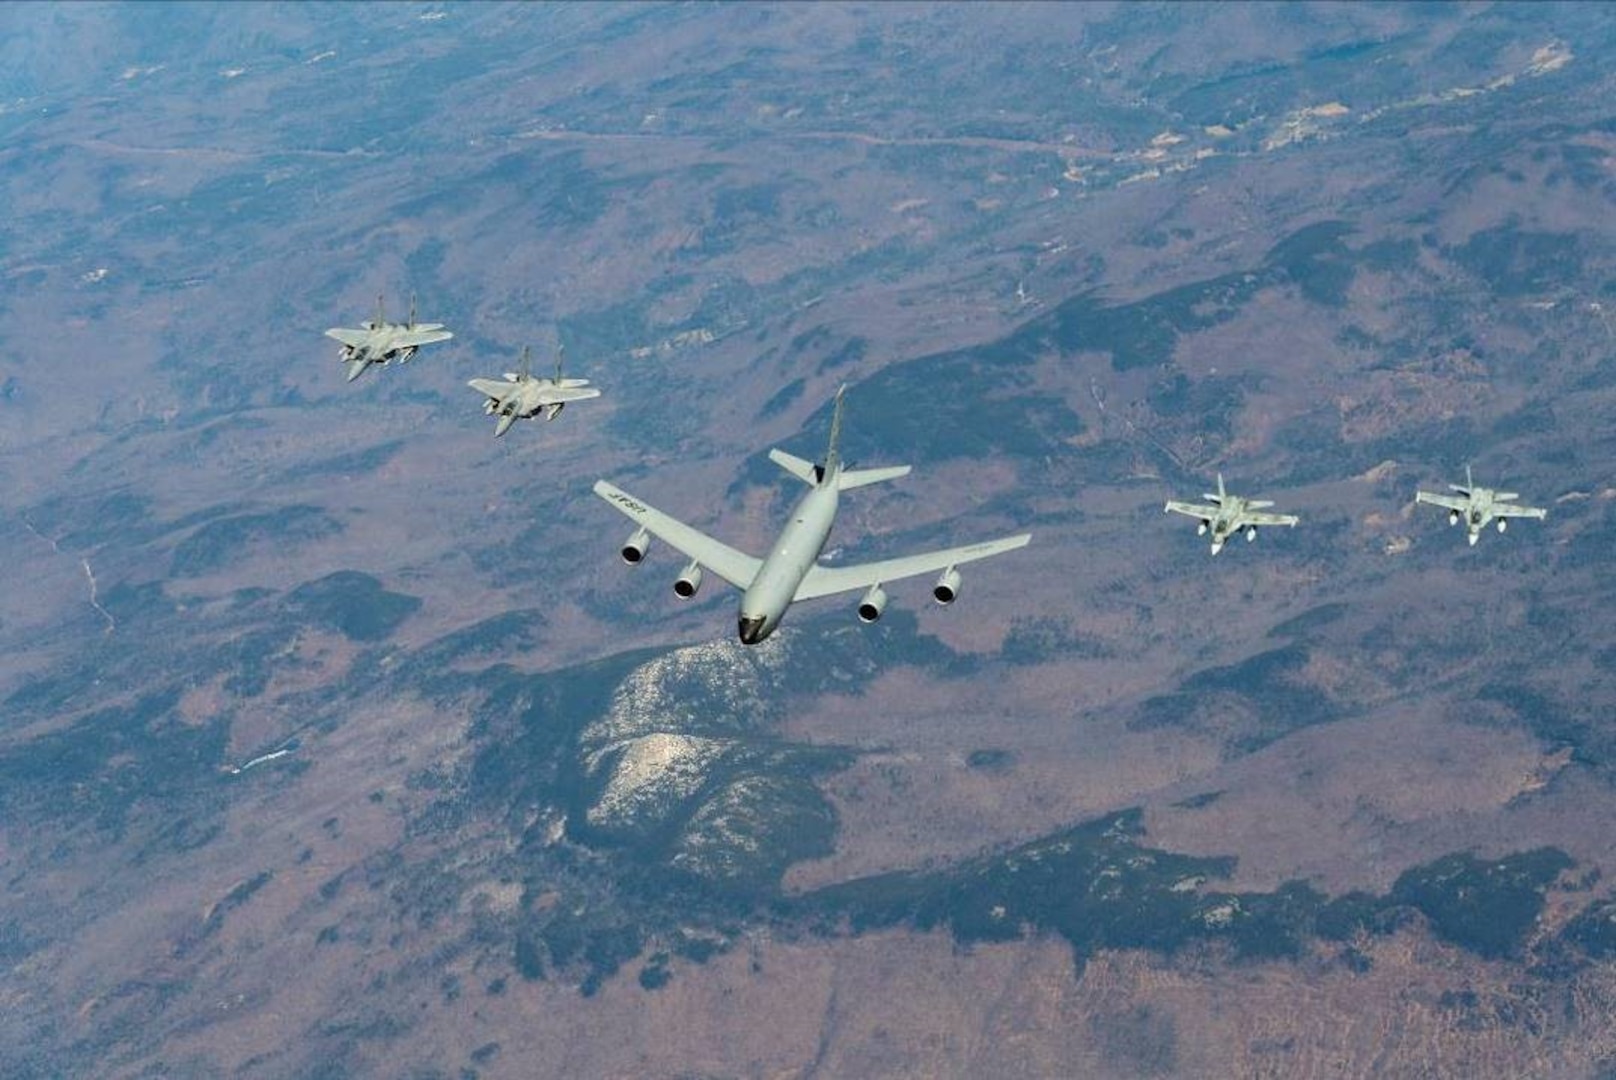 A bi-national Canadian and American command, NORAD employs a network of space-based, aerial and ground-based sensors, air-to-air refueling tankers and fighter aircraft, controlled by a sophisticated command and control network to deter, detect and defend against aerial threats that originate outside or within North American airspace.